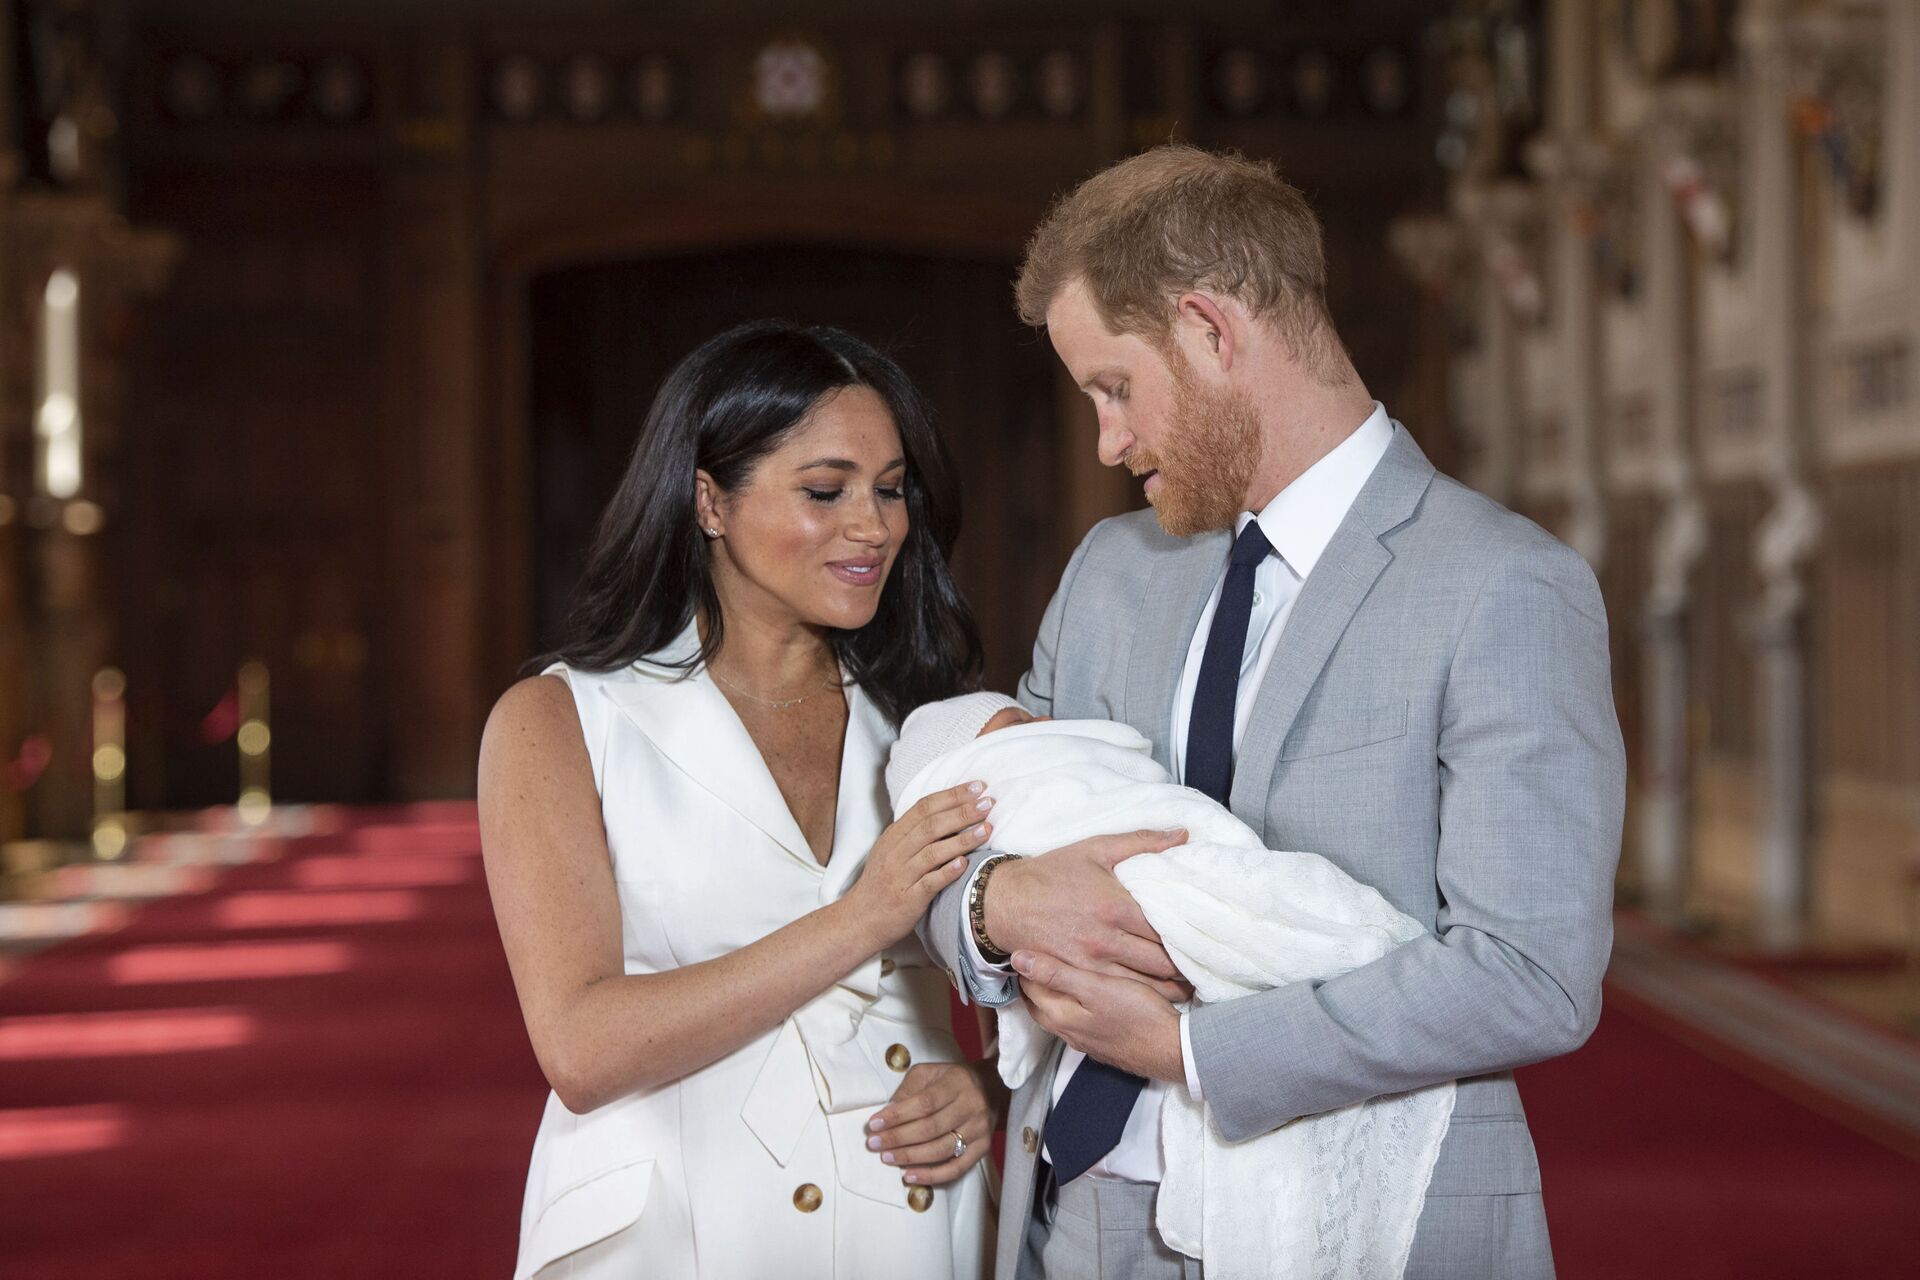 In this Wednesday May 8, 2019 file photo Britain's Prince Harry and Meghan, Duchess of Sussex, pose during a photocall with their newborn son Archie, in St George's Hall at Windsor Castle, Windsor, south England. The Duchess of Sussex has revealed that she had a miscarriage in July. Meghan described the experience in an opinion piece in the New York Times on Wednesday. She wrote: I knew, as I clutched my firstborn child, that I was losing my second. The former Meghan Markle and husband Prince Harry have a son, Archie, born in 2019.  - Sputnik International, 1920, 21.10.2021